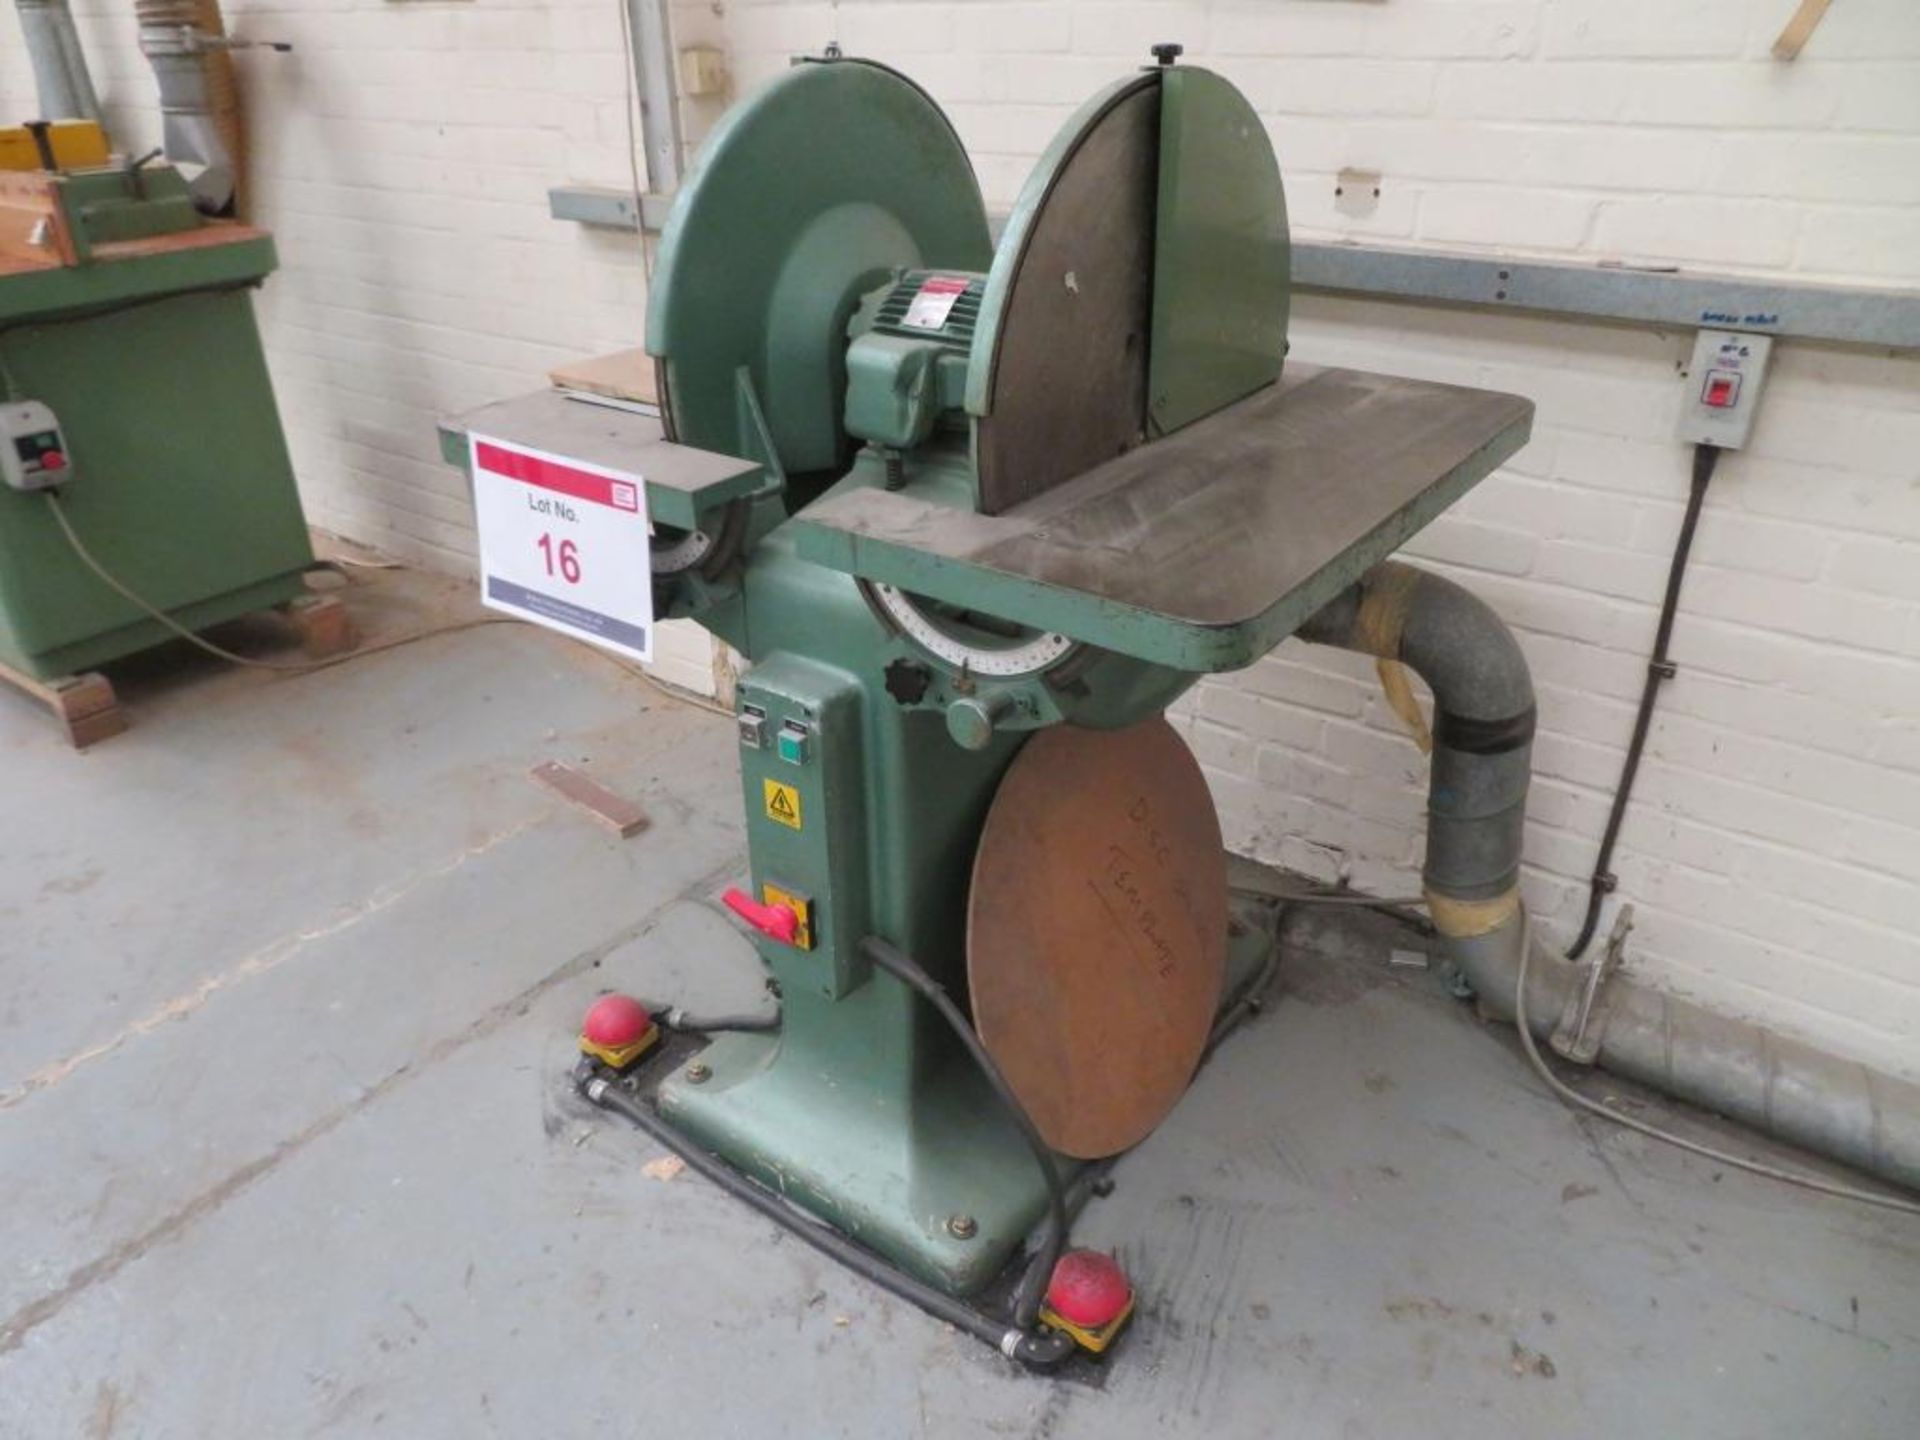 Phillipson BP vertical disk sander. NB. A work Method Statement and Risk Assessment must be provided - Image 3 of 3